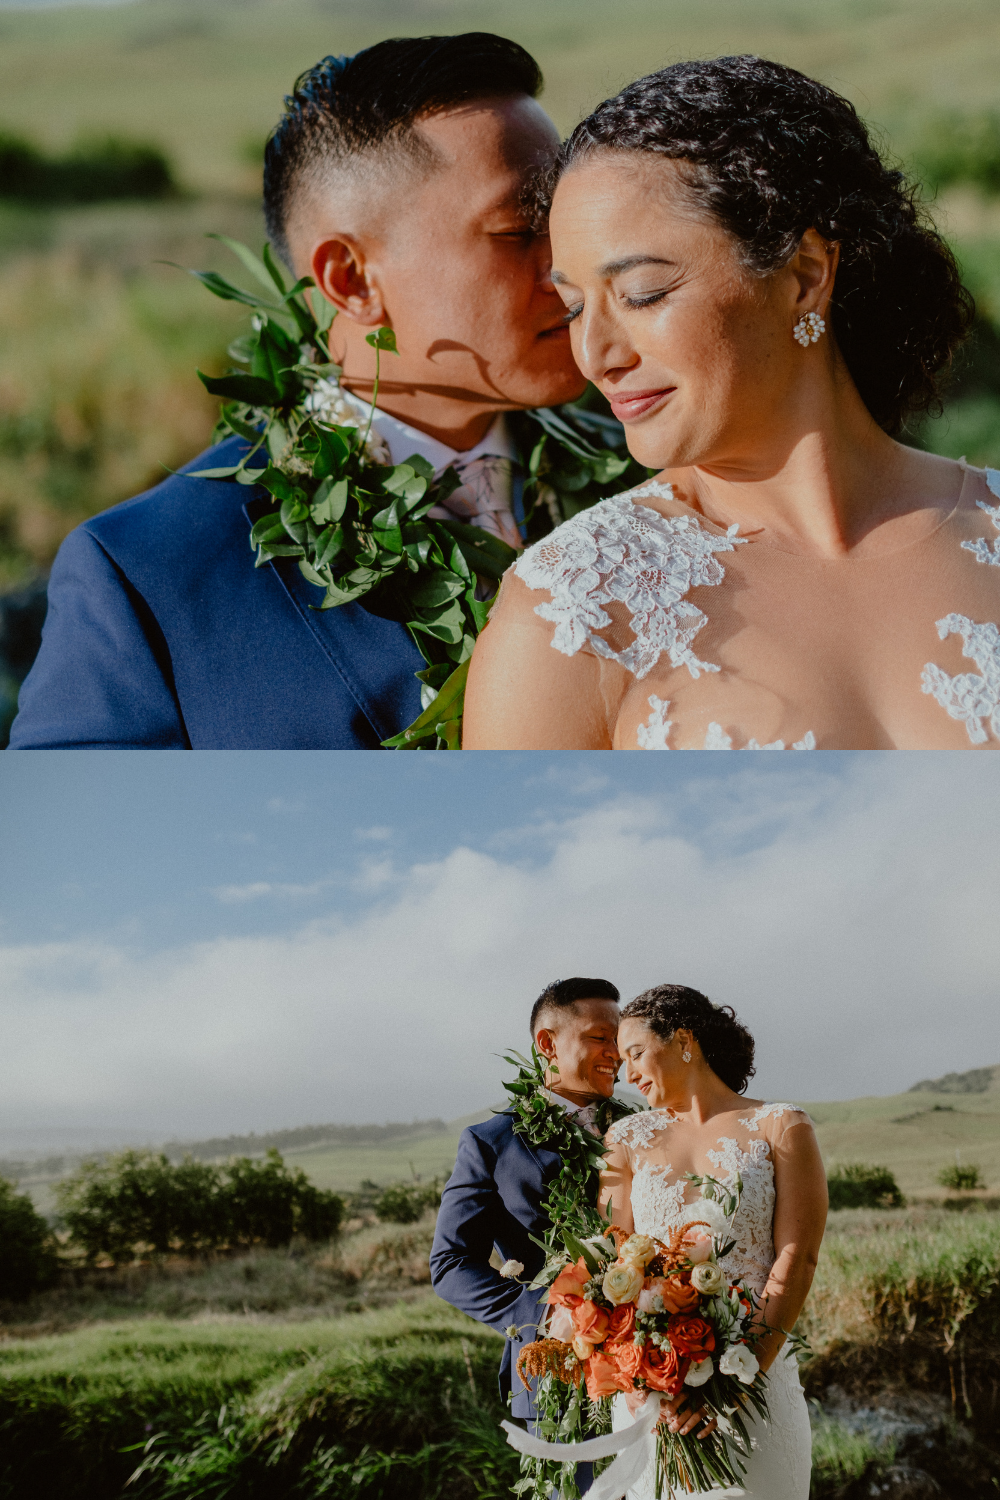 Newlywed photography of bride and groom with wedding day photography inspiration of Hawaii Big Island wedding with bride and groom walking after their Hawaiian elopement | Big Island Elopement, Hawaii Elopement Photographer, Hawaii Elopement and Wedding Inspiration, Hawaii Elopement ideas, Big Island Wedding Inspiration, Fall Hawaiian Wedding Ideas, Fall Wedding Inspiration, Hawaii Outdoor Wedding Ideas | chelseaabril.com